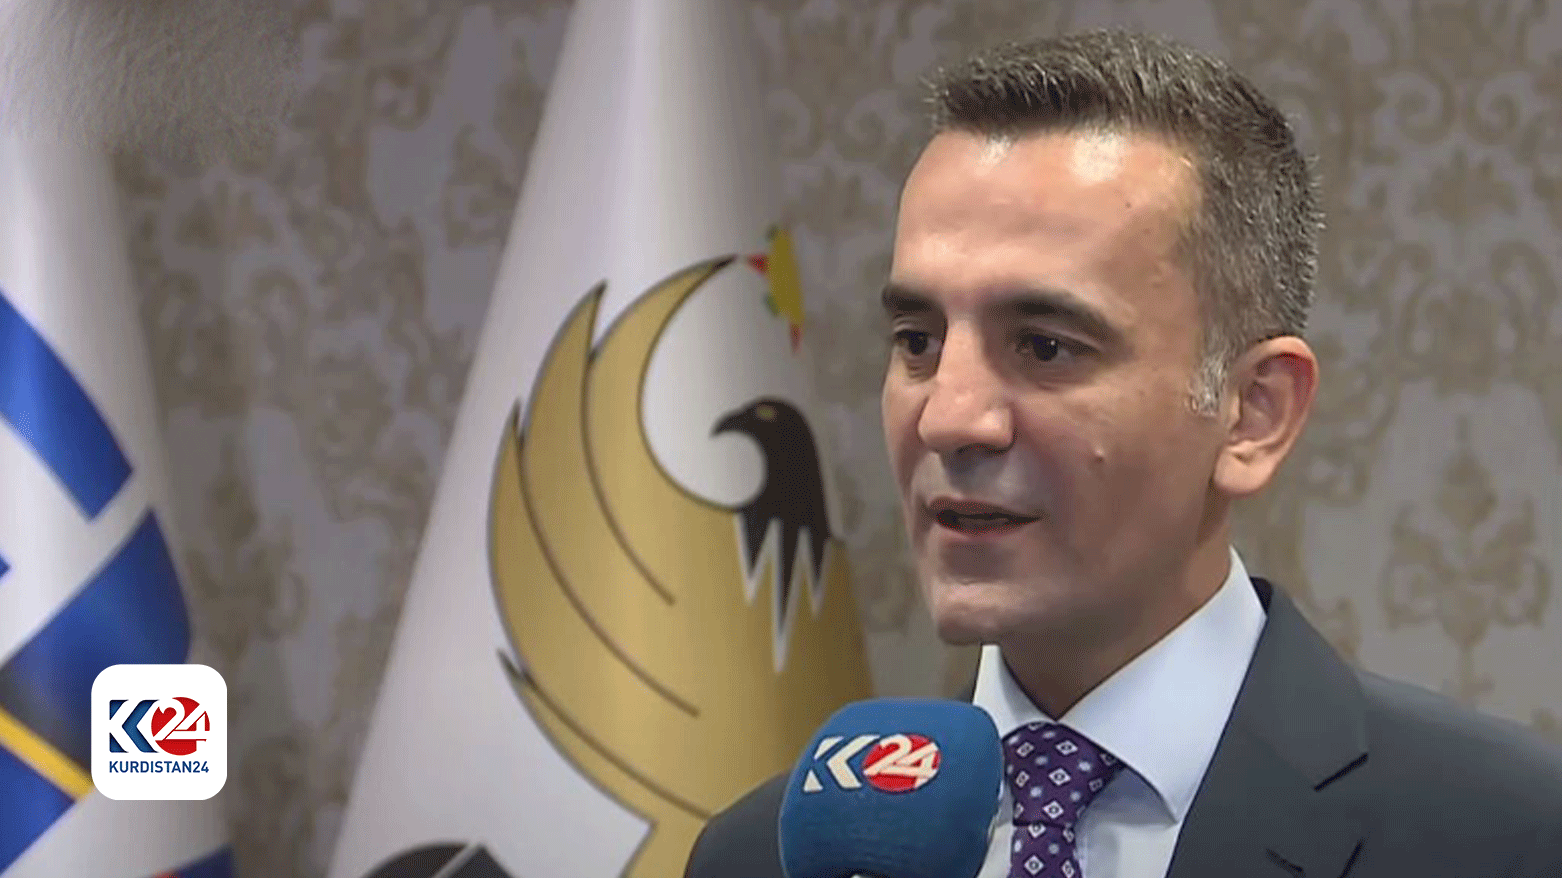 Nineteen airlines operate  flights daily at Erbil International Airport says director